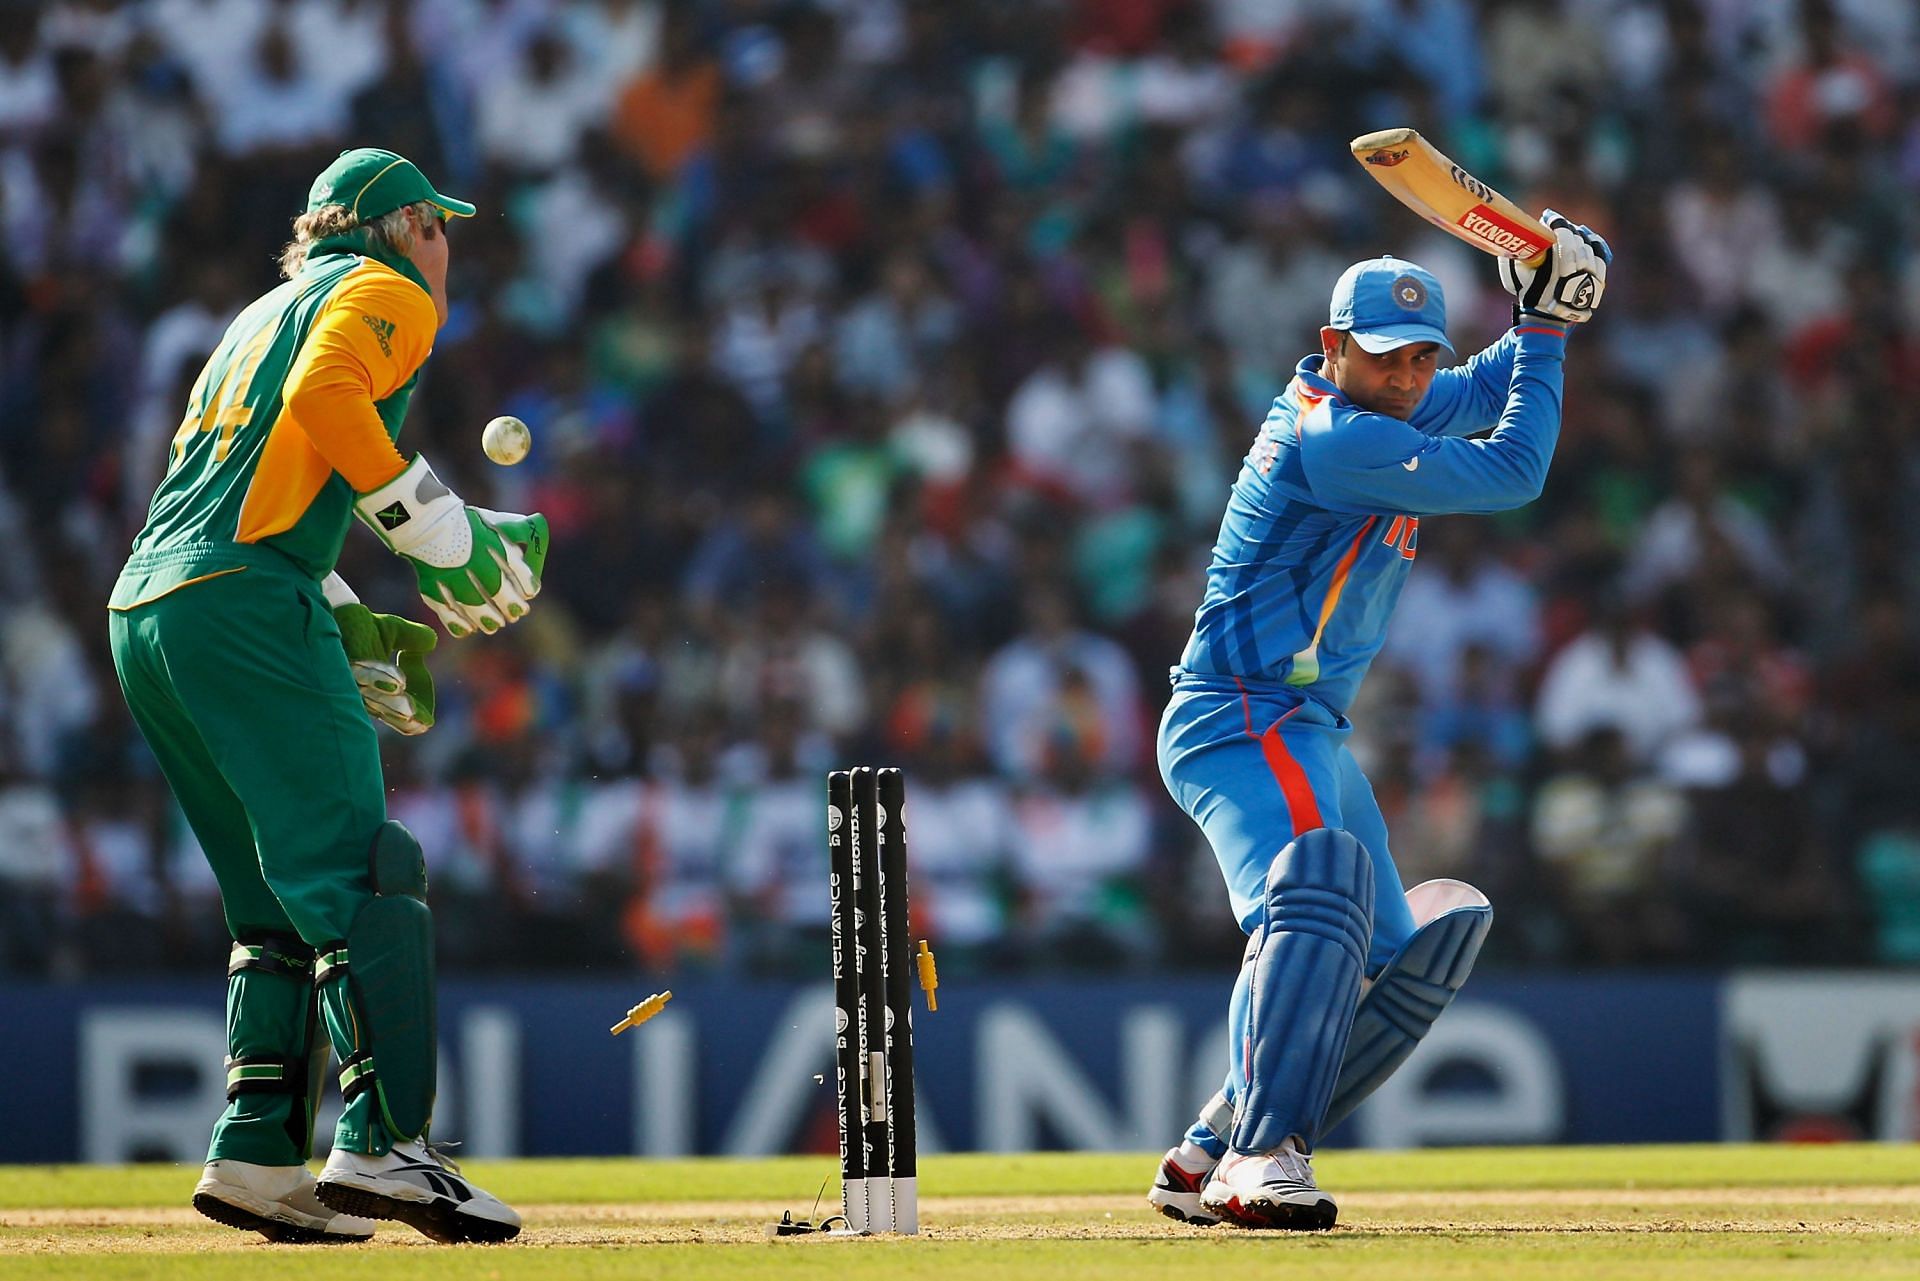 Virender Sehwag is bowled by Faf du Plessis. (Pic: Getty Images)